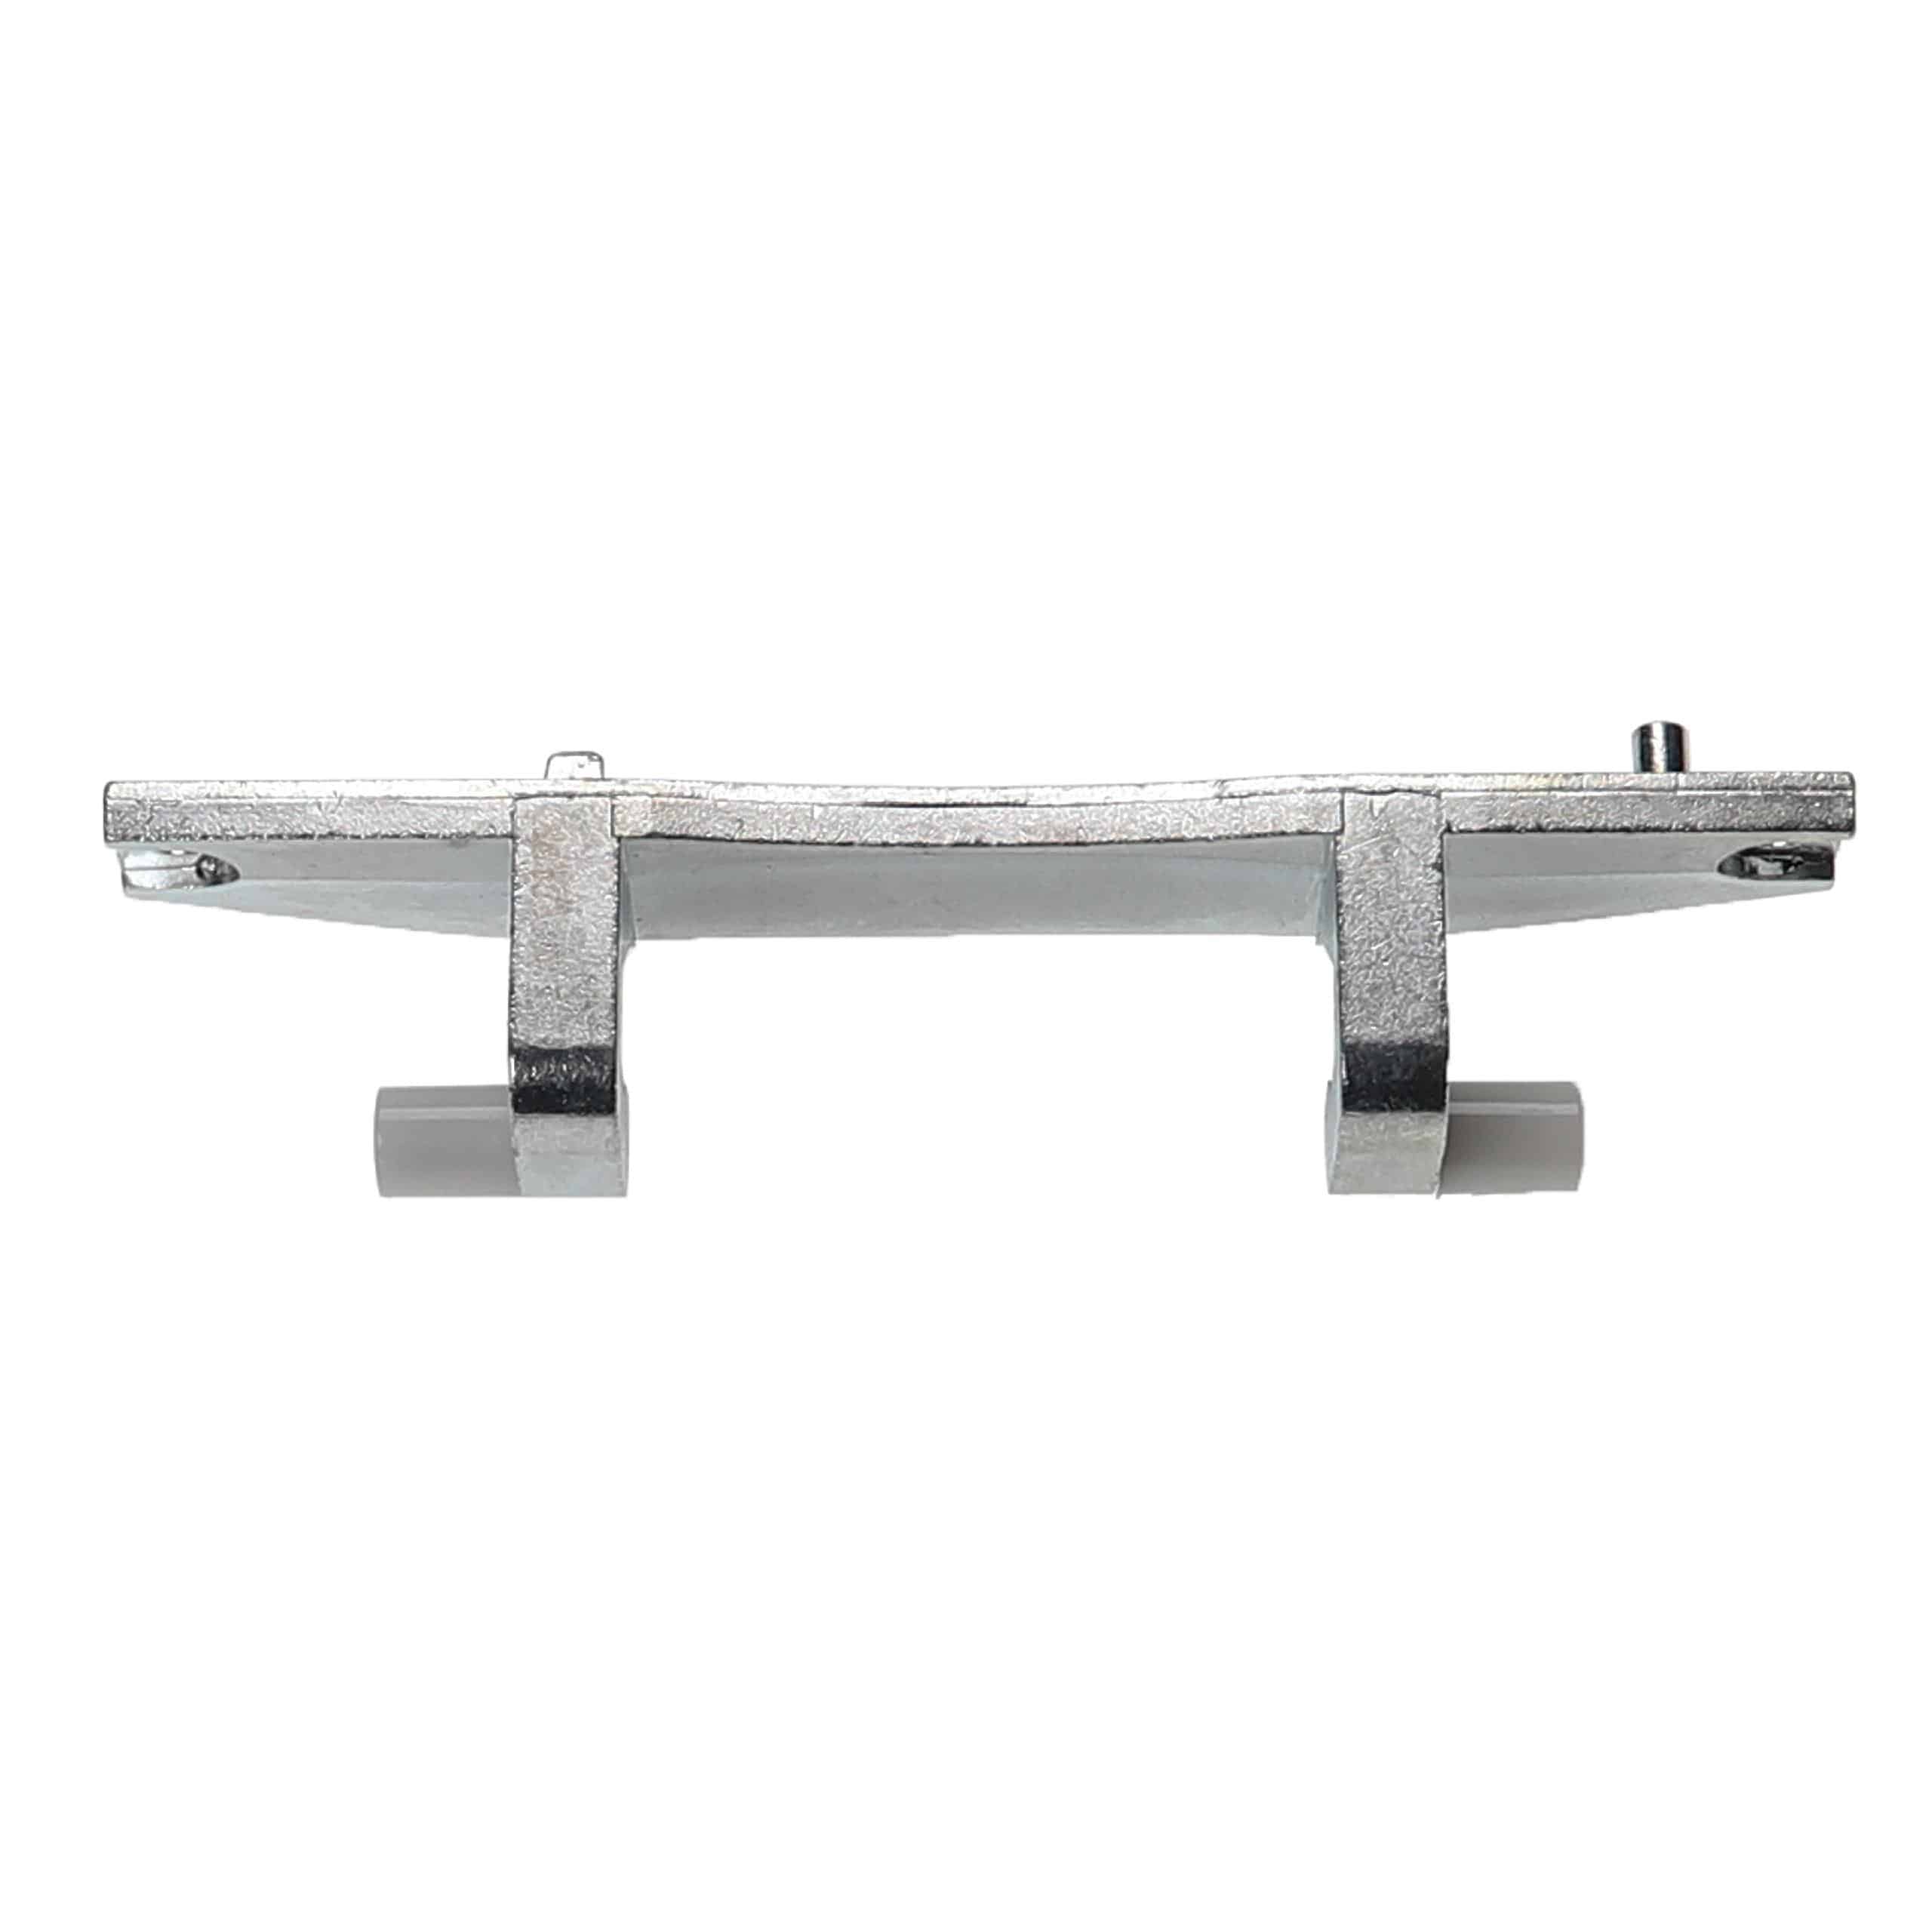 Door Hinge as Replacement for 00620835 for Bosch / Constructa / Neff / Balay / Siemens Washing Machine